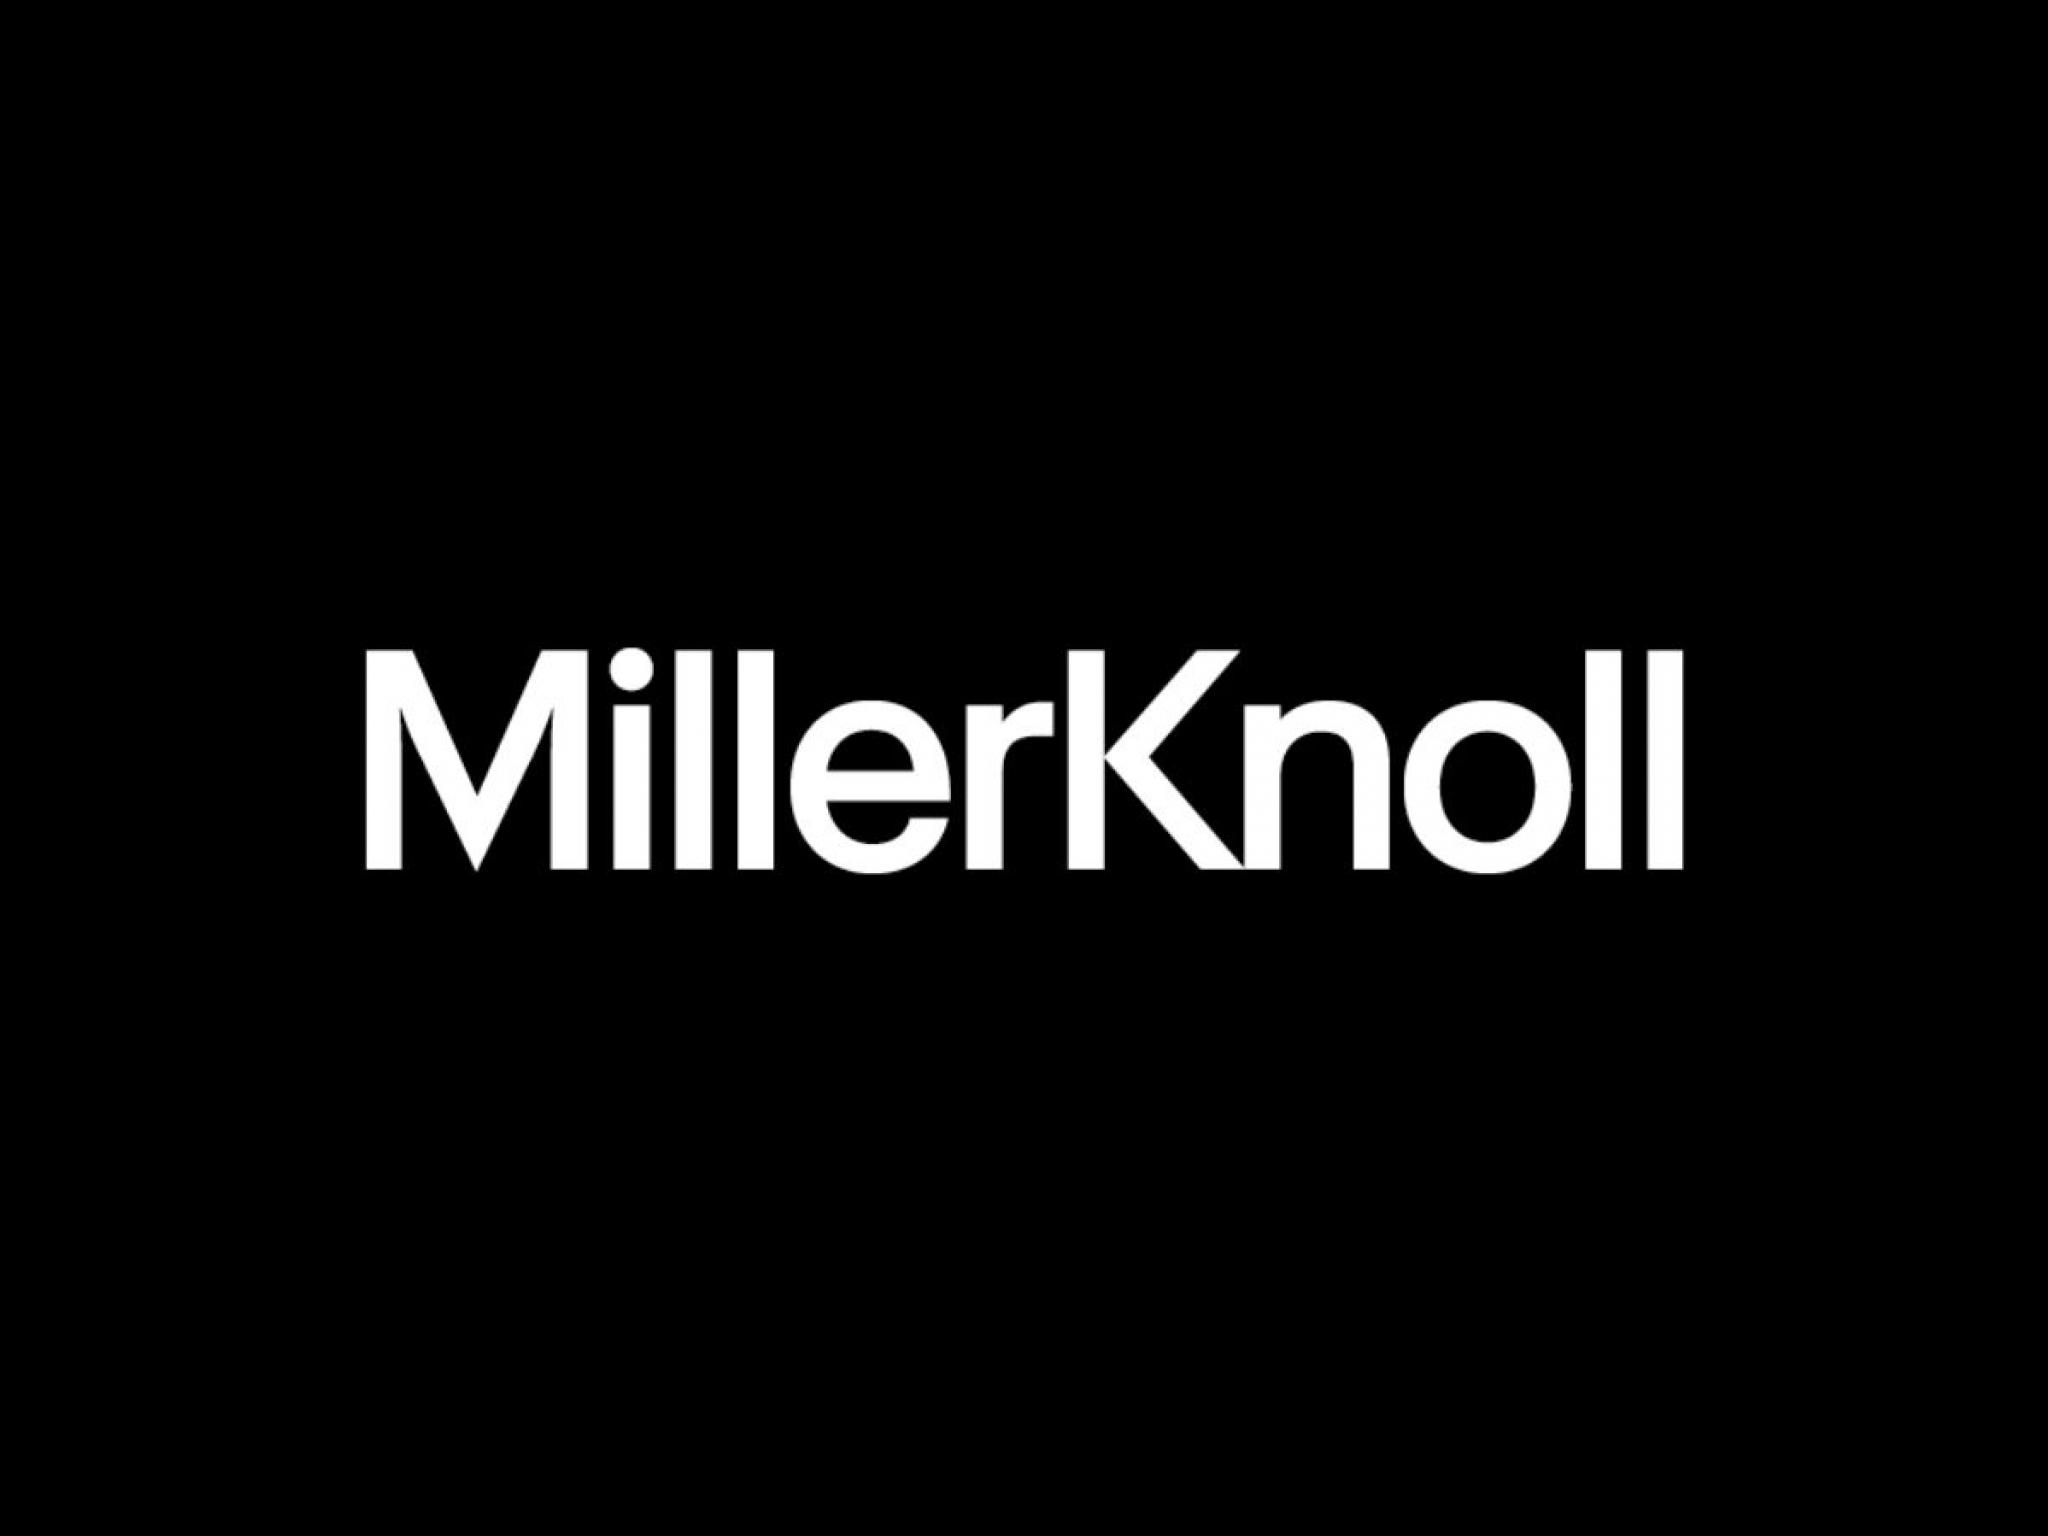  millerknoll-posts-weak-sales-joins-chemours-rumble-and-other-big-stocks-moving-lower-in-thursdays-pre-market-session 